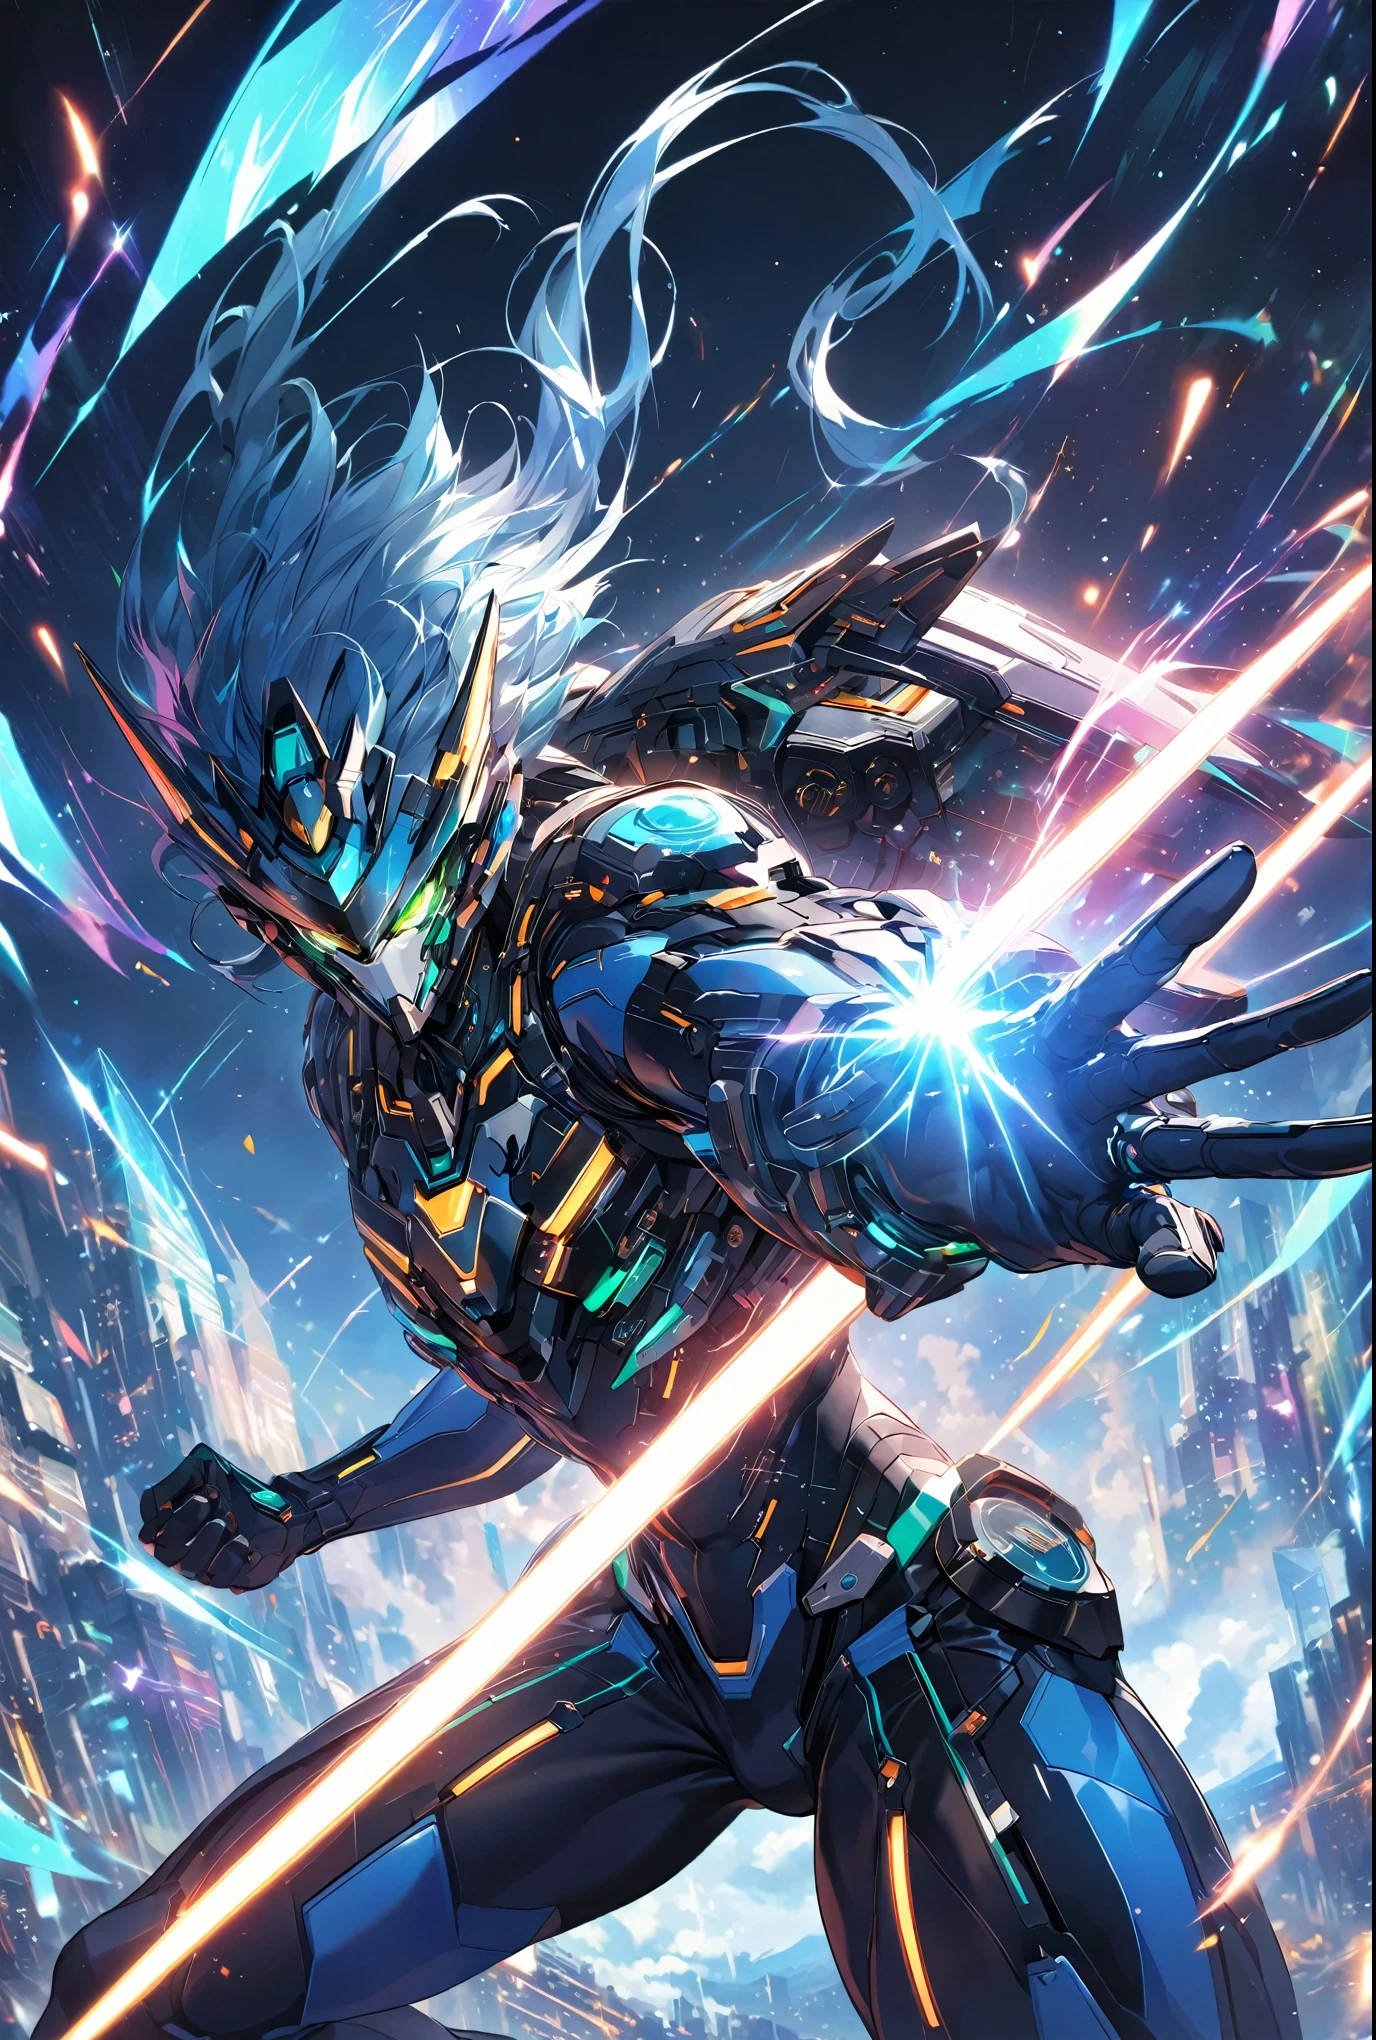 A dynamic male character in a futuristic black and blue cyber suit with glowing LED lines, short spiky blue hair, and sharp green eyes. He is tall, muscular, and has an energy backpack on his back. The character is in a combat pose, wielding energy blades, with a serious and focused expression. The background is a digital cityscape with floating holographic elements and light effects, representing a cybernetic world.,Battle Style,Dynamic Pose,cool,The best composition,Intricate details,Very detailed,Disorganized,Anatomically correct